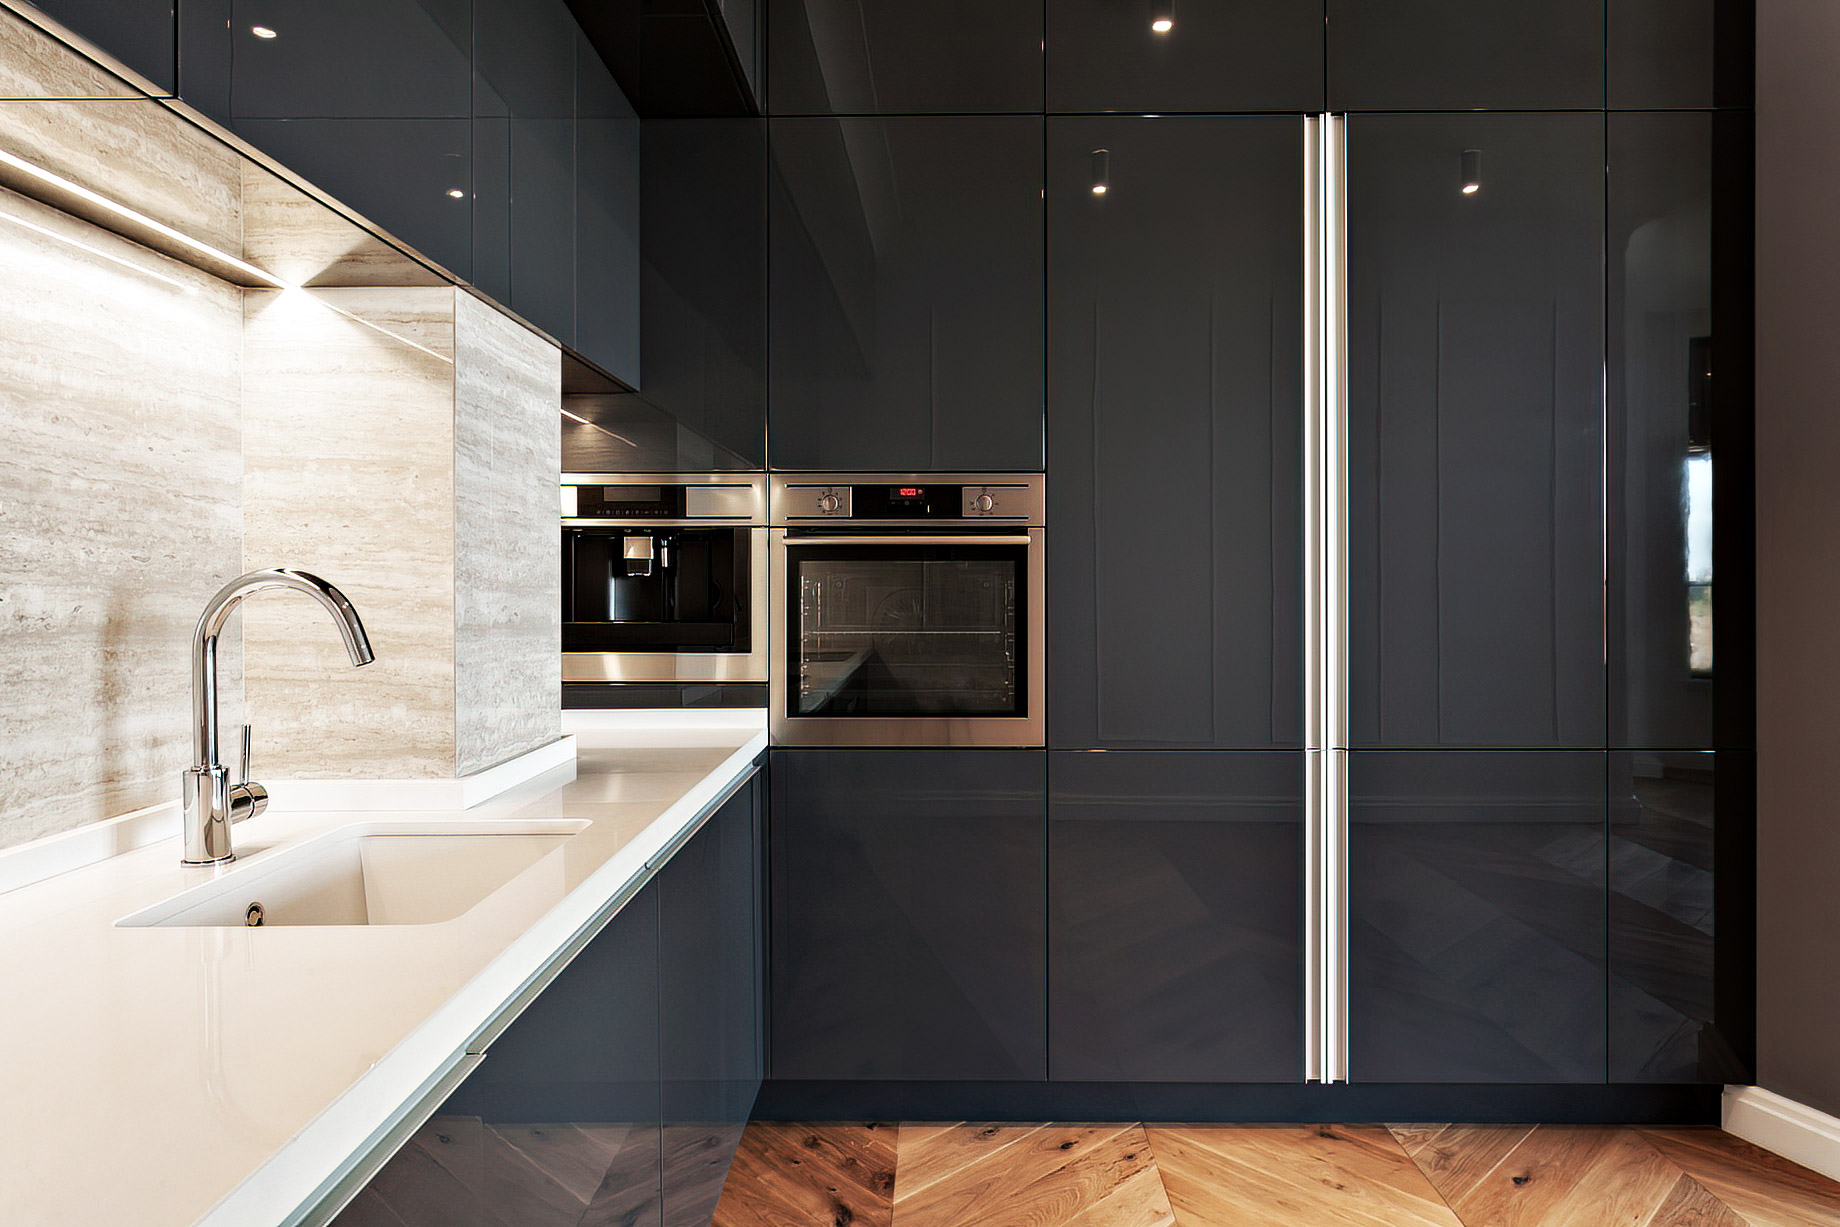 Modern Kitchen Cabinetry with Built-in Appliances